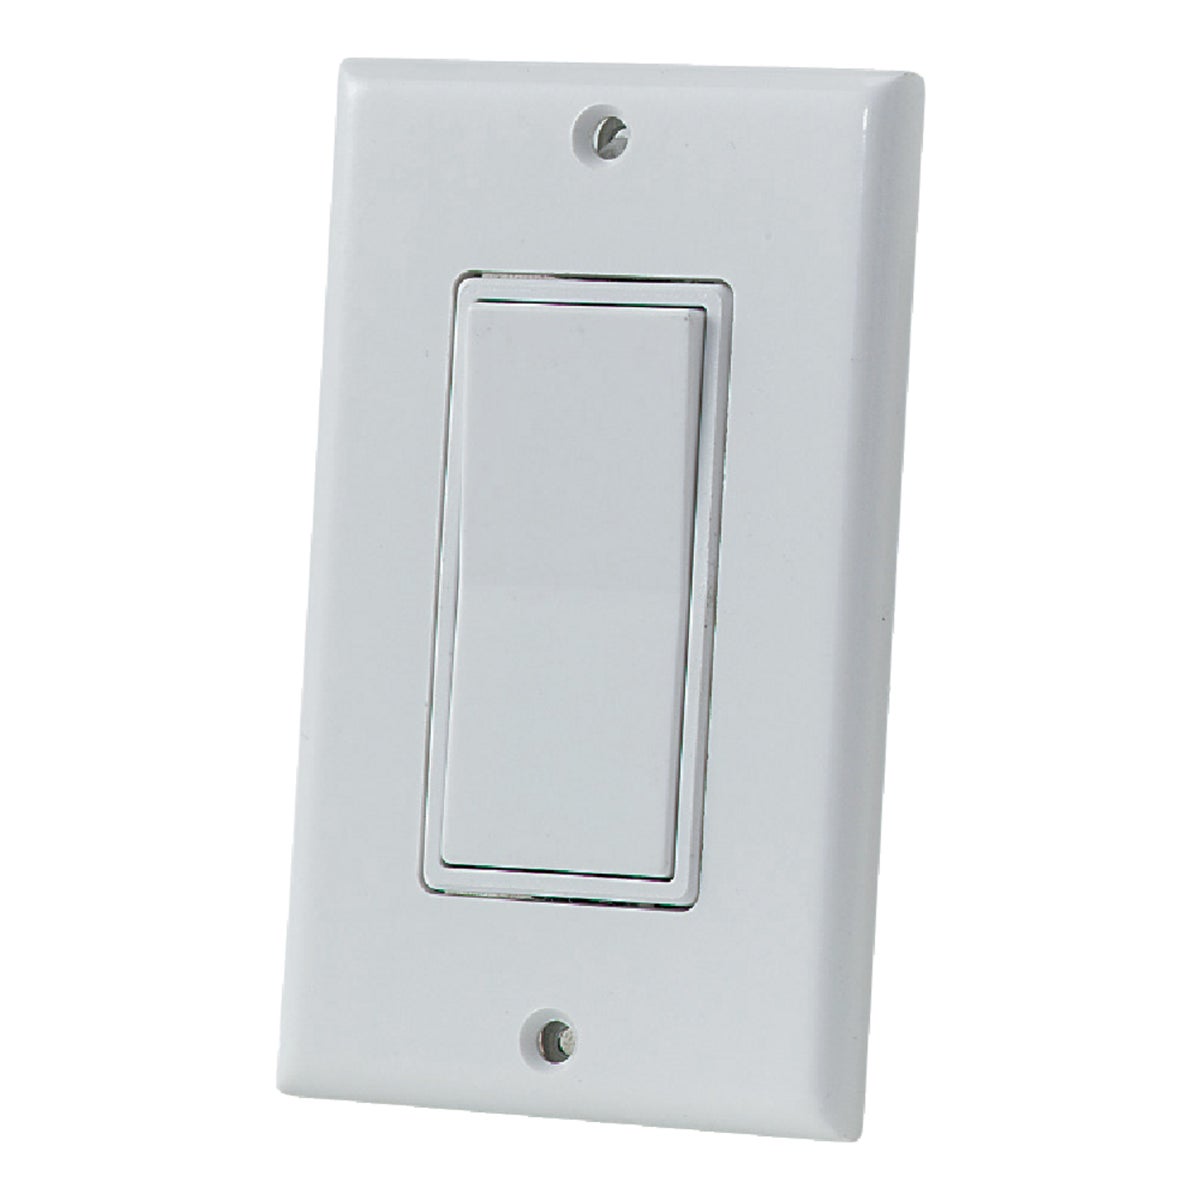 Item 522341, Replaces any standard 3-way wall switch.